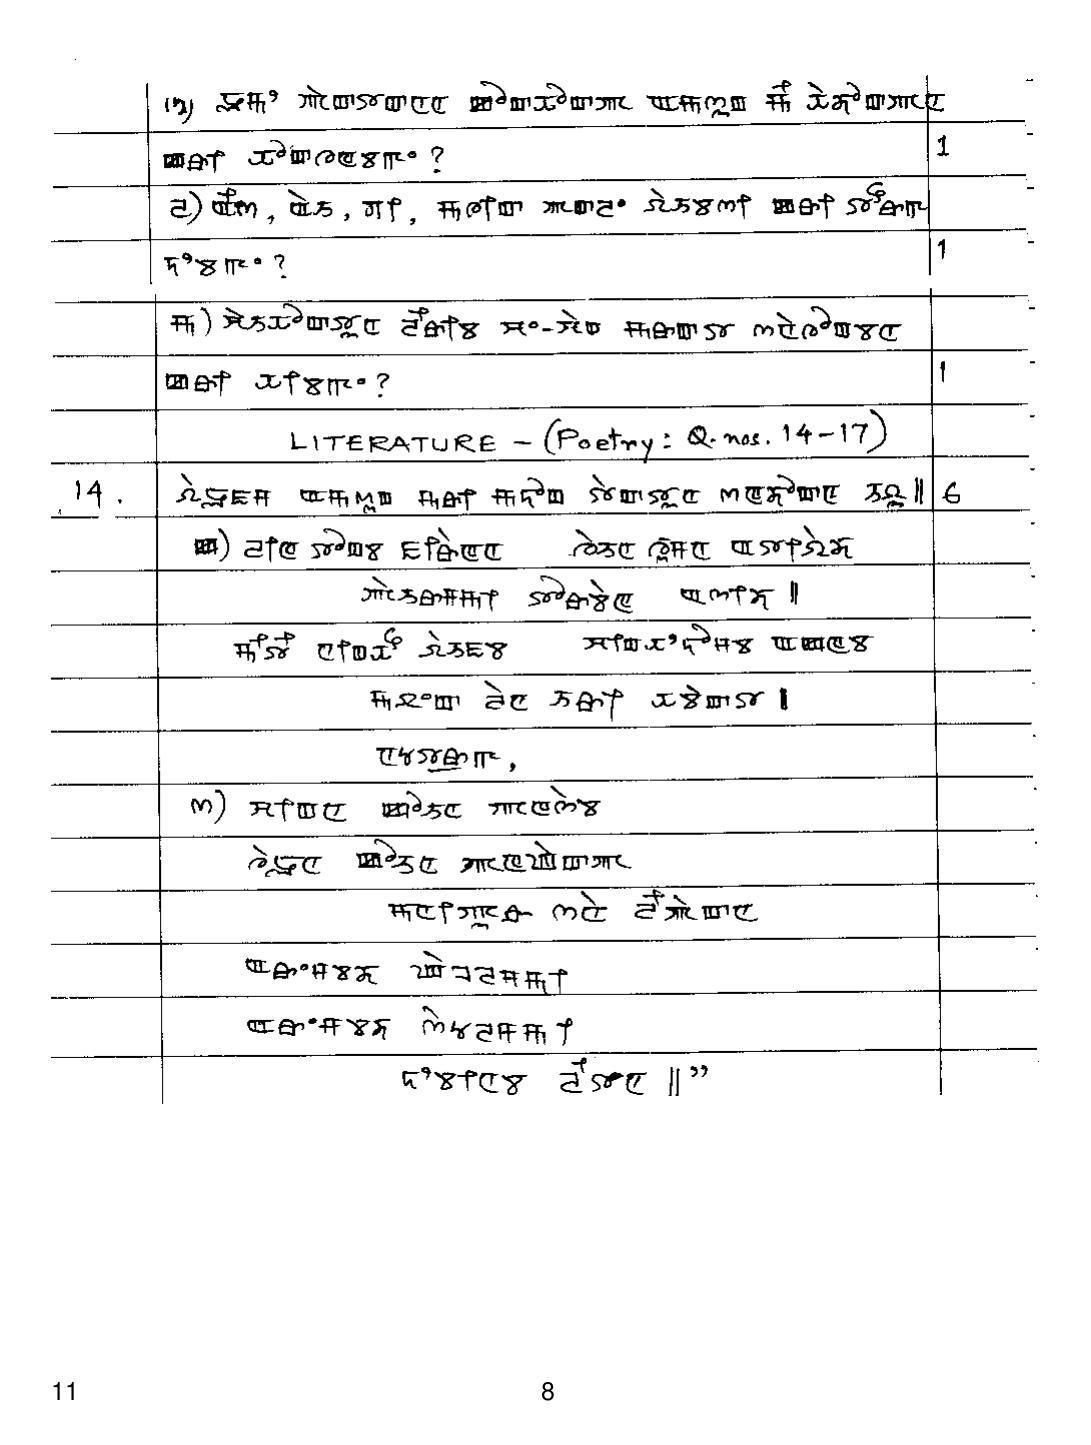 CBSE Class 12 11 Manipuri_compressed 2019 Question Paper - Page 8